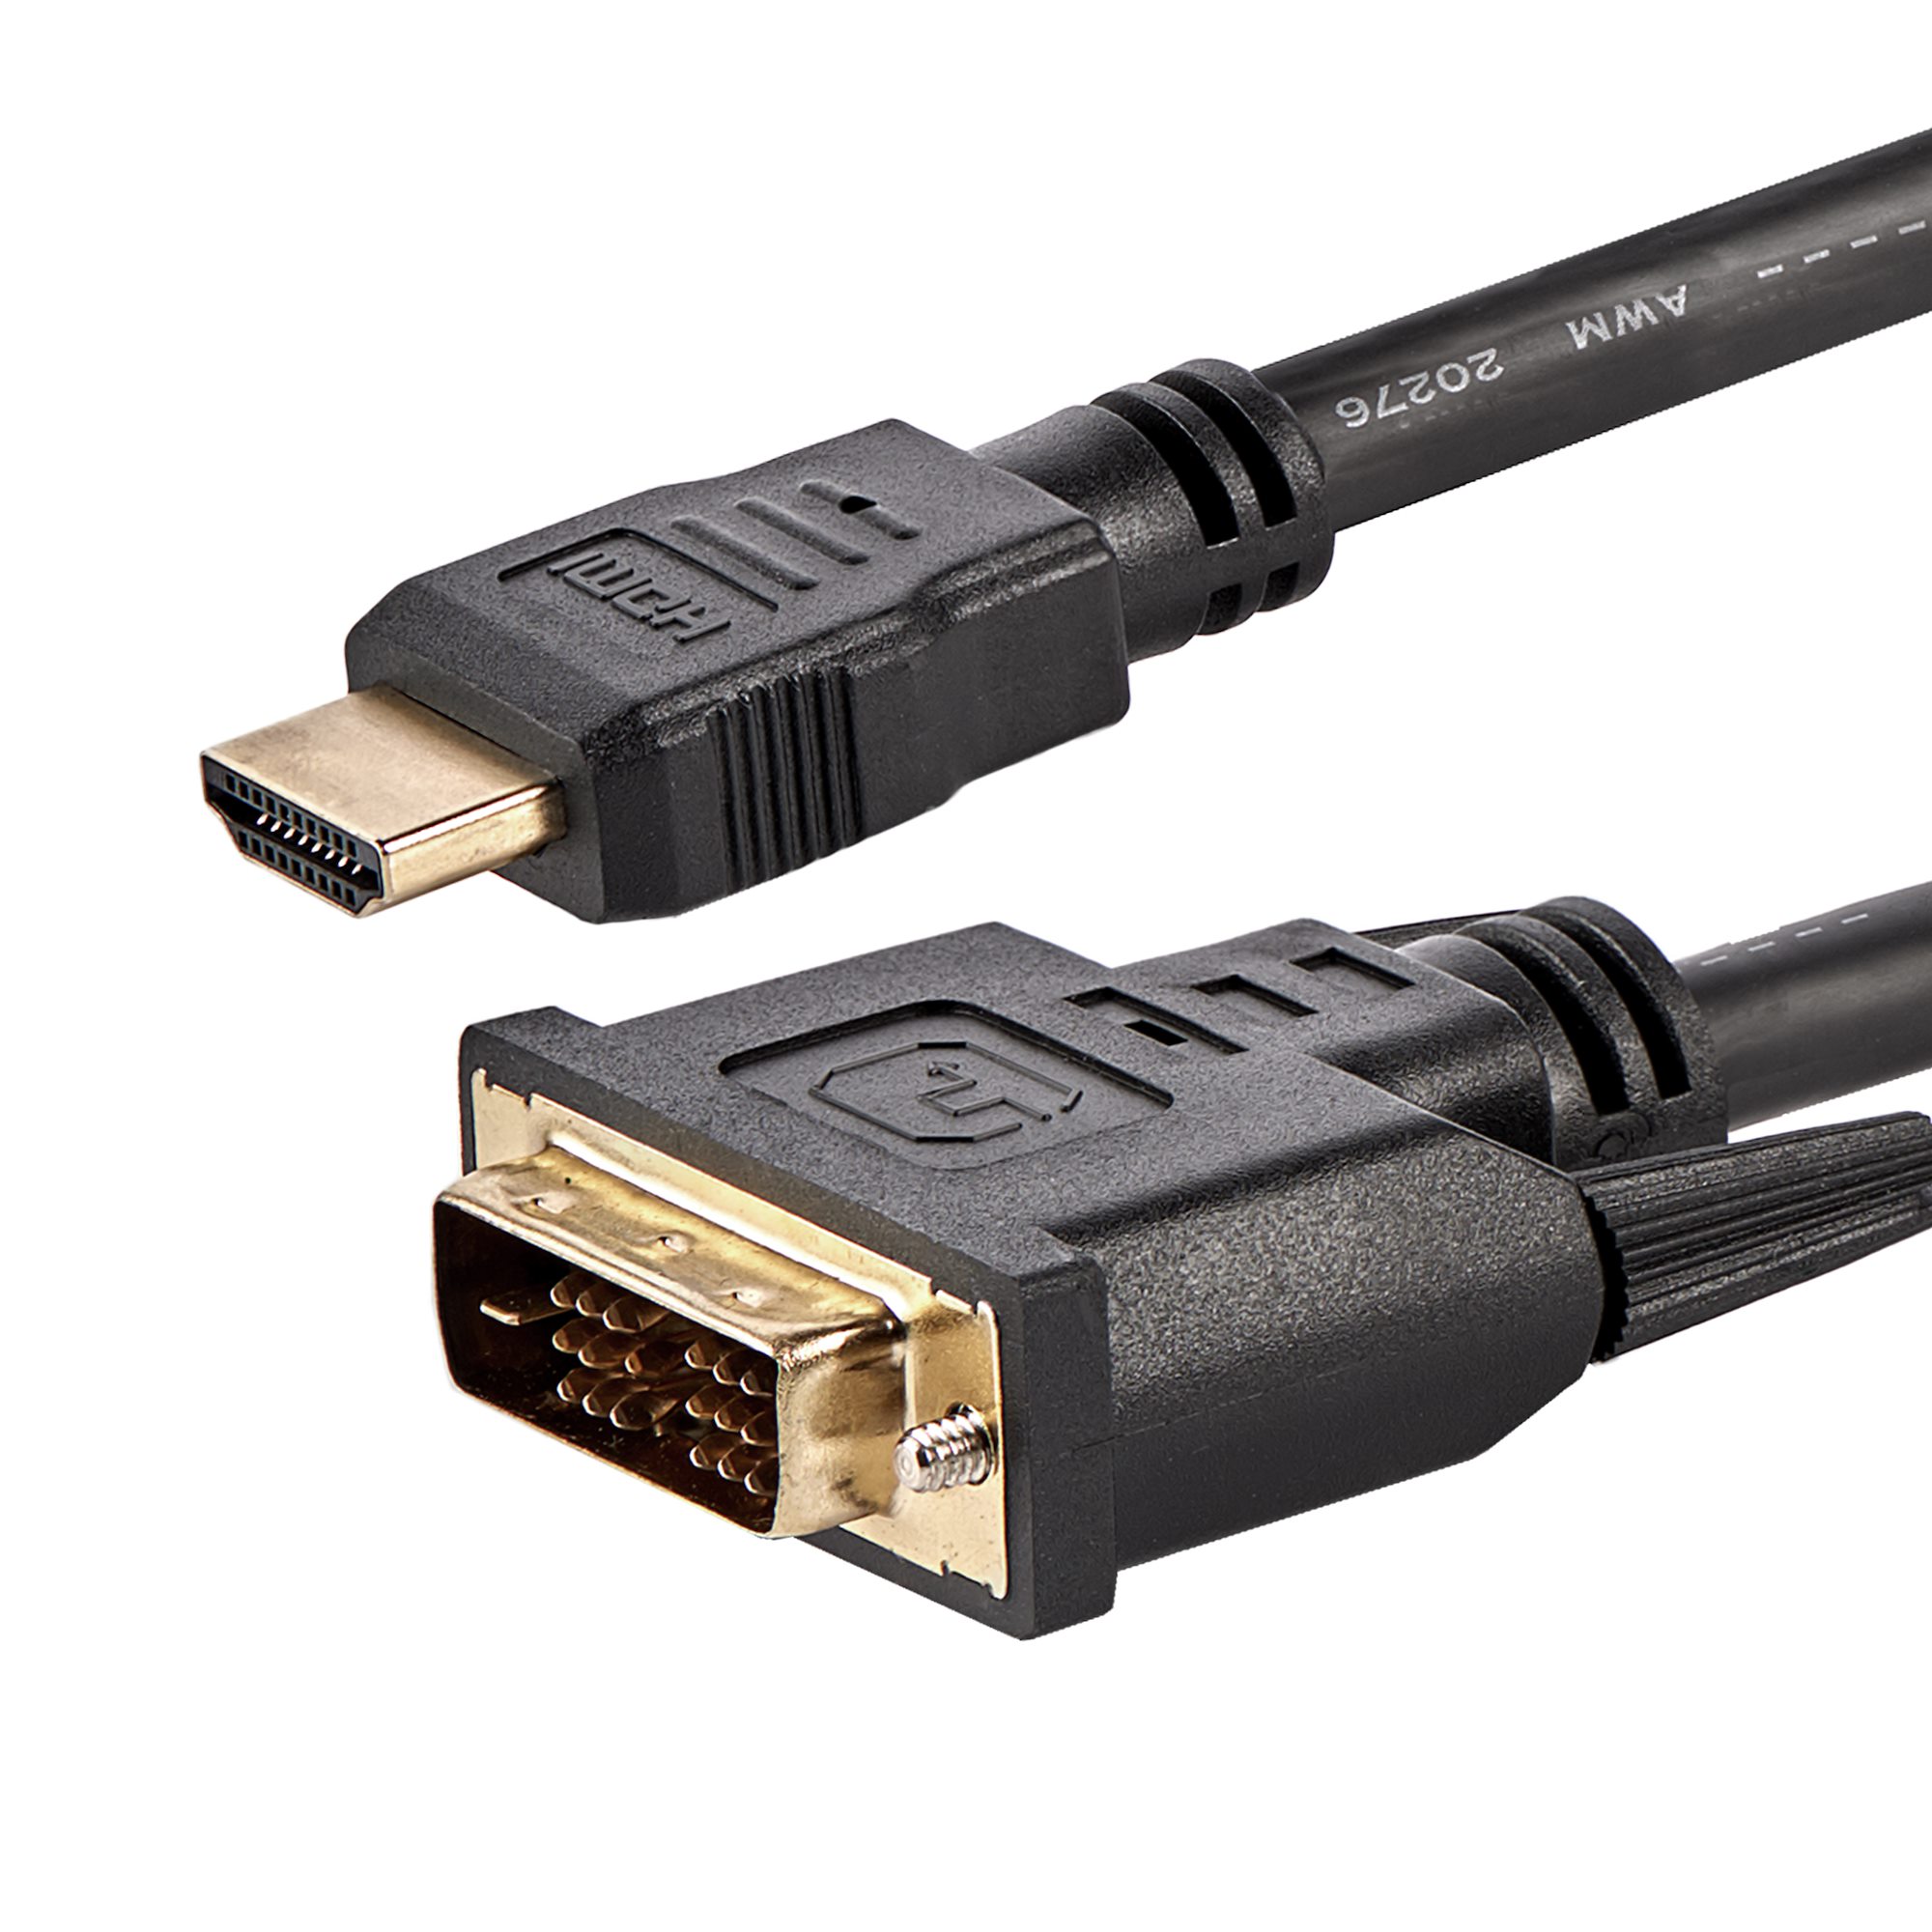 1.8m HDMI to DVI-D Adapter Cable Cord - HDMI® Cables & HDMI Adapters |